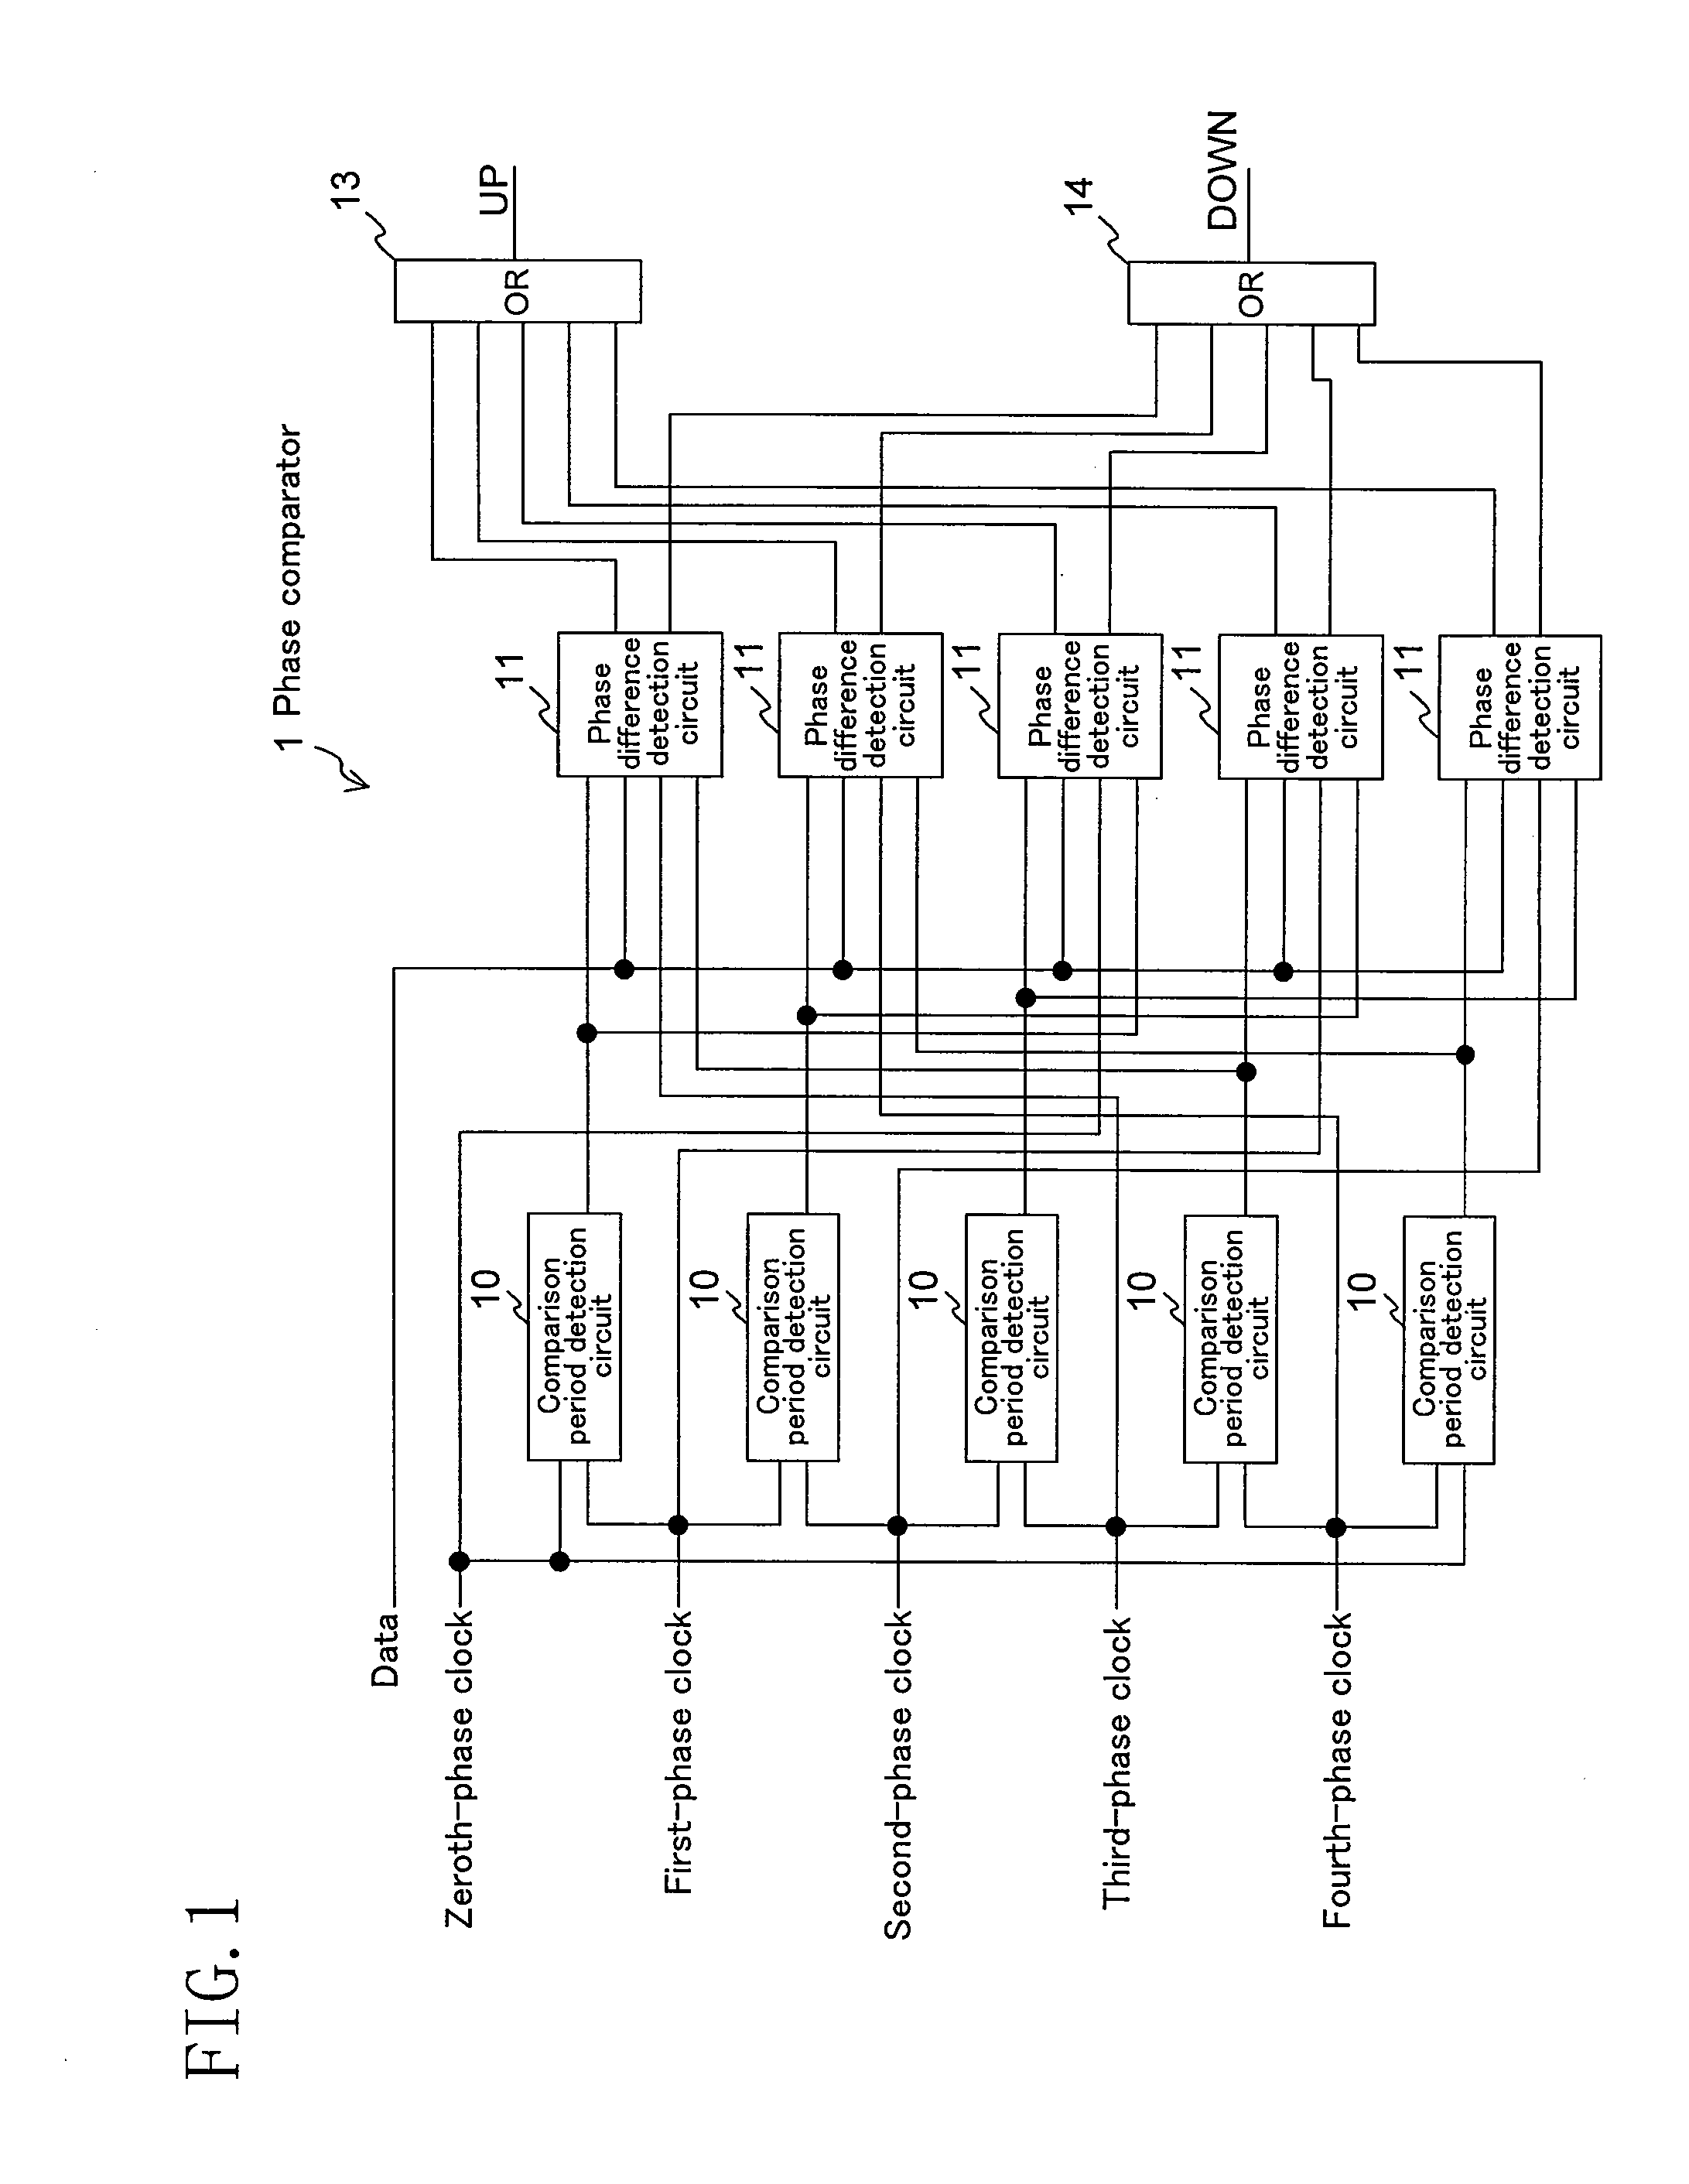 Phase comparator and regulation circuit